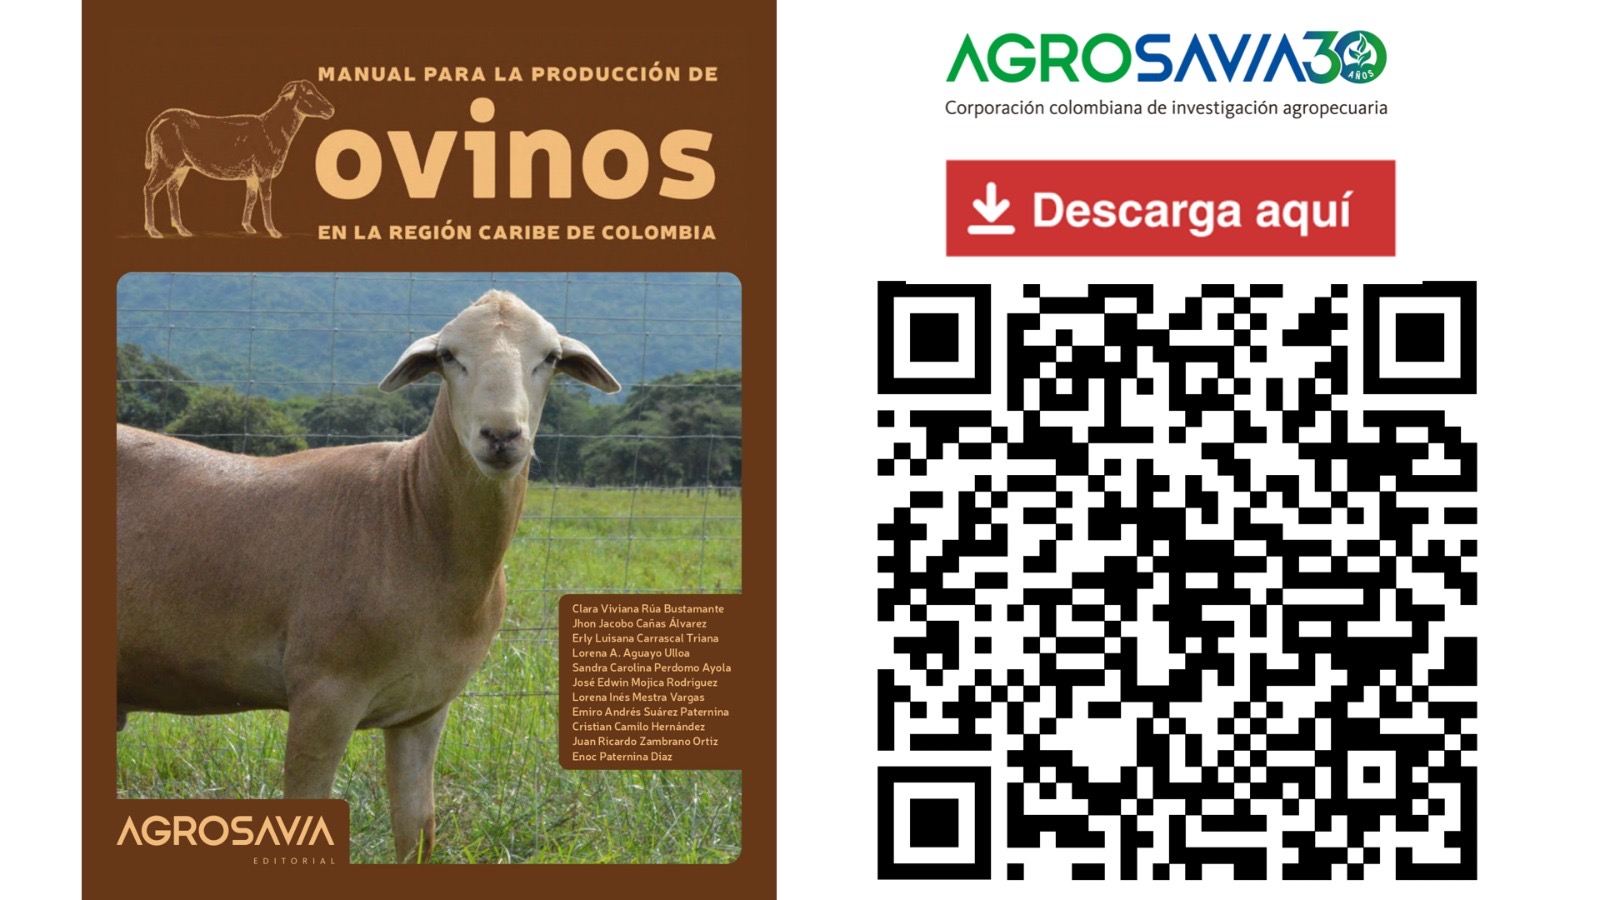 Technological recommendations for meat sheep production in the Caribbean: recent editorial production of AGROSAVIA